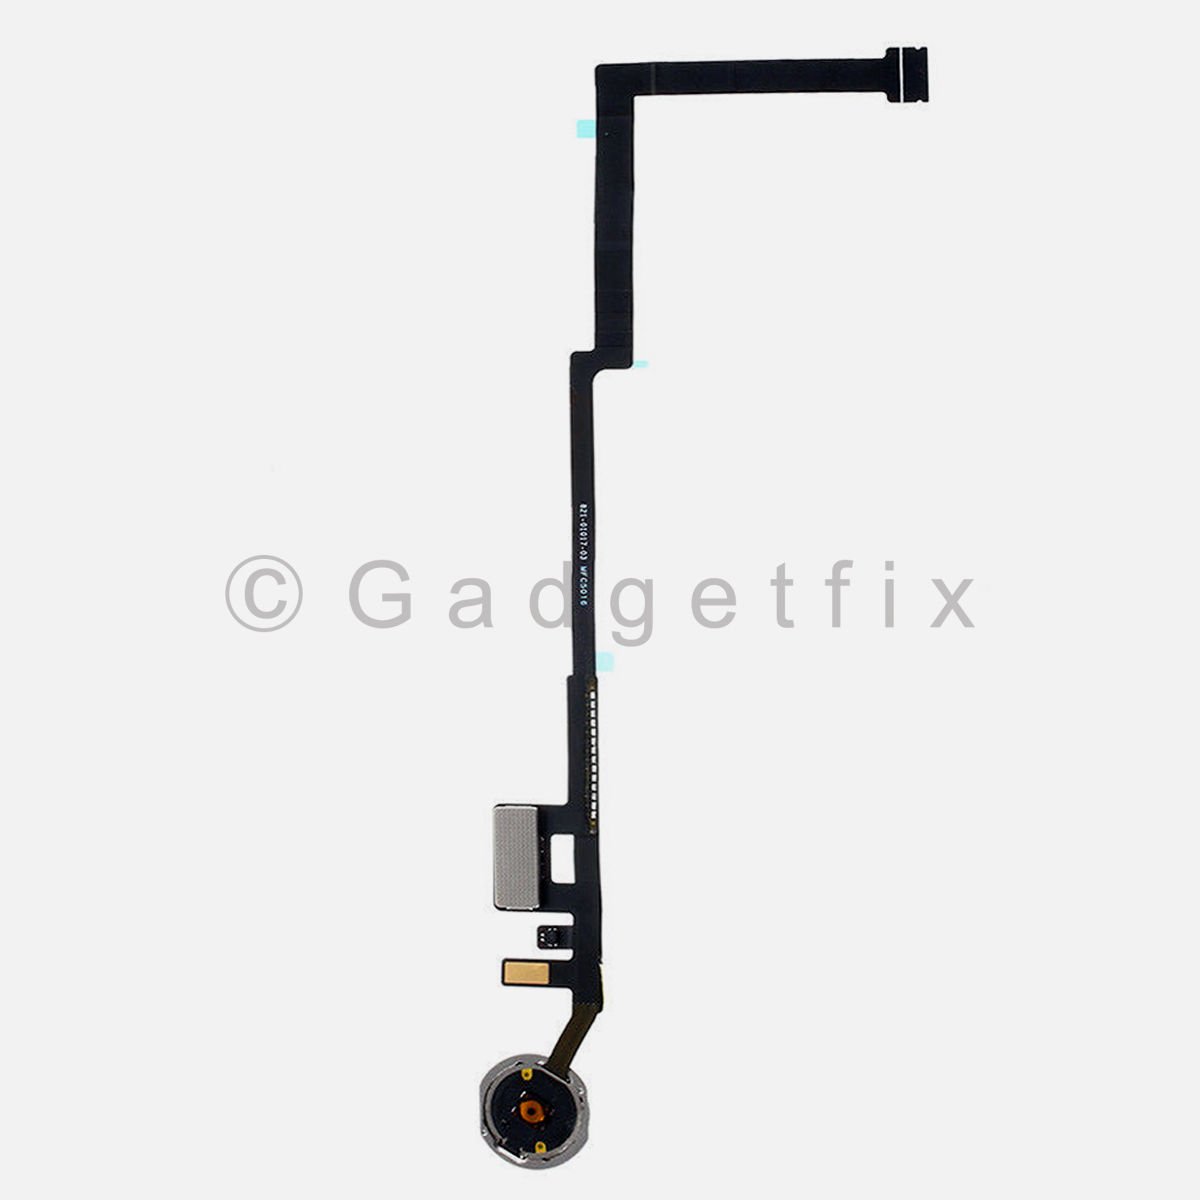 Black Home Button Key Flex Cable Connector For iPad 5th Gen 9.7" 2017 A1822 A1823